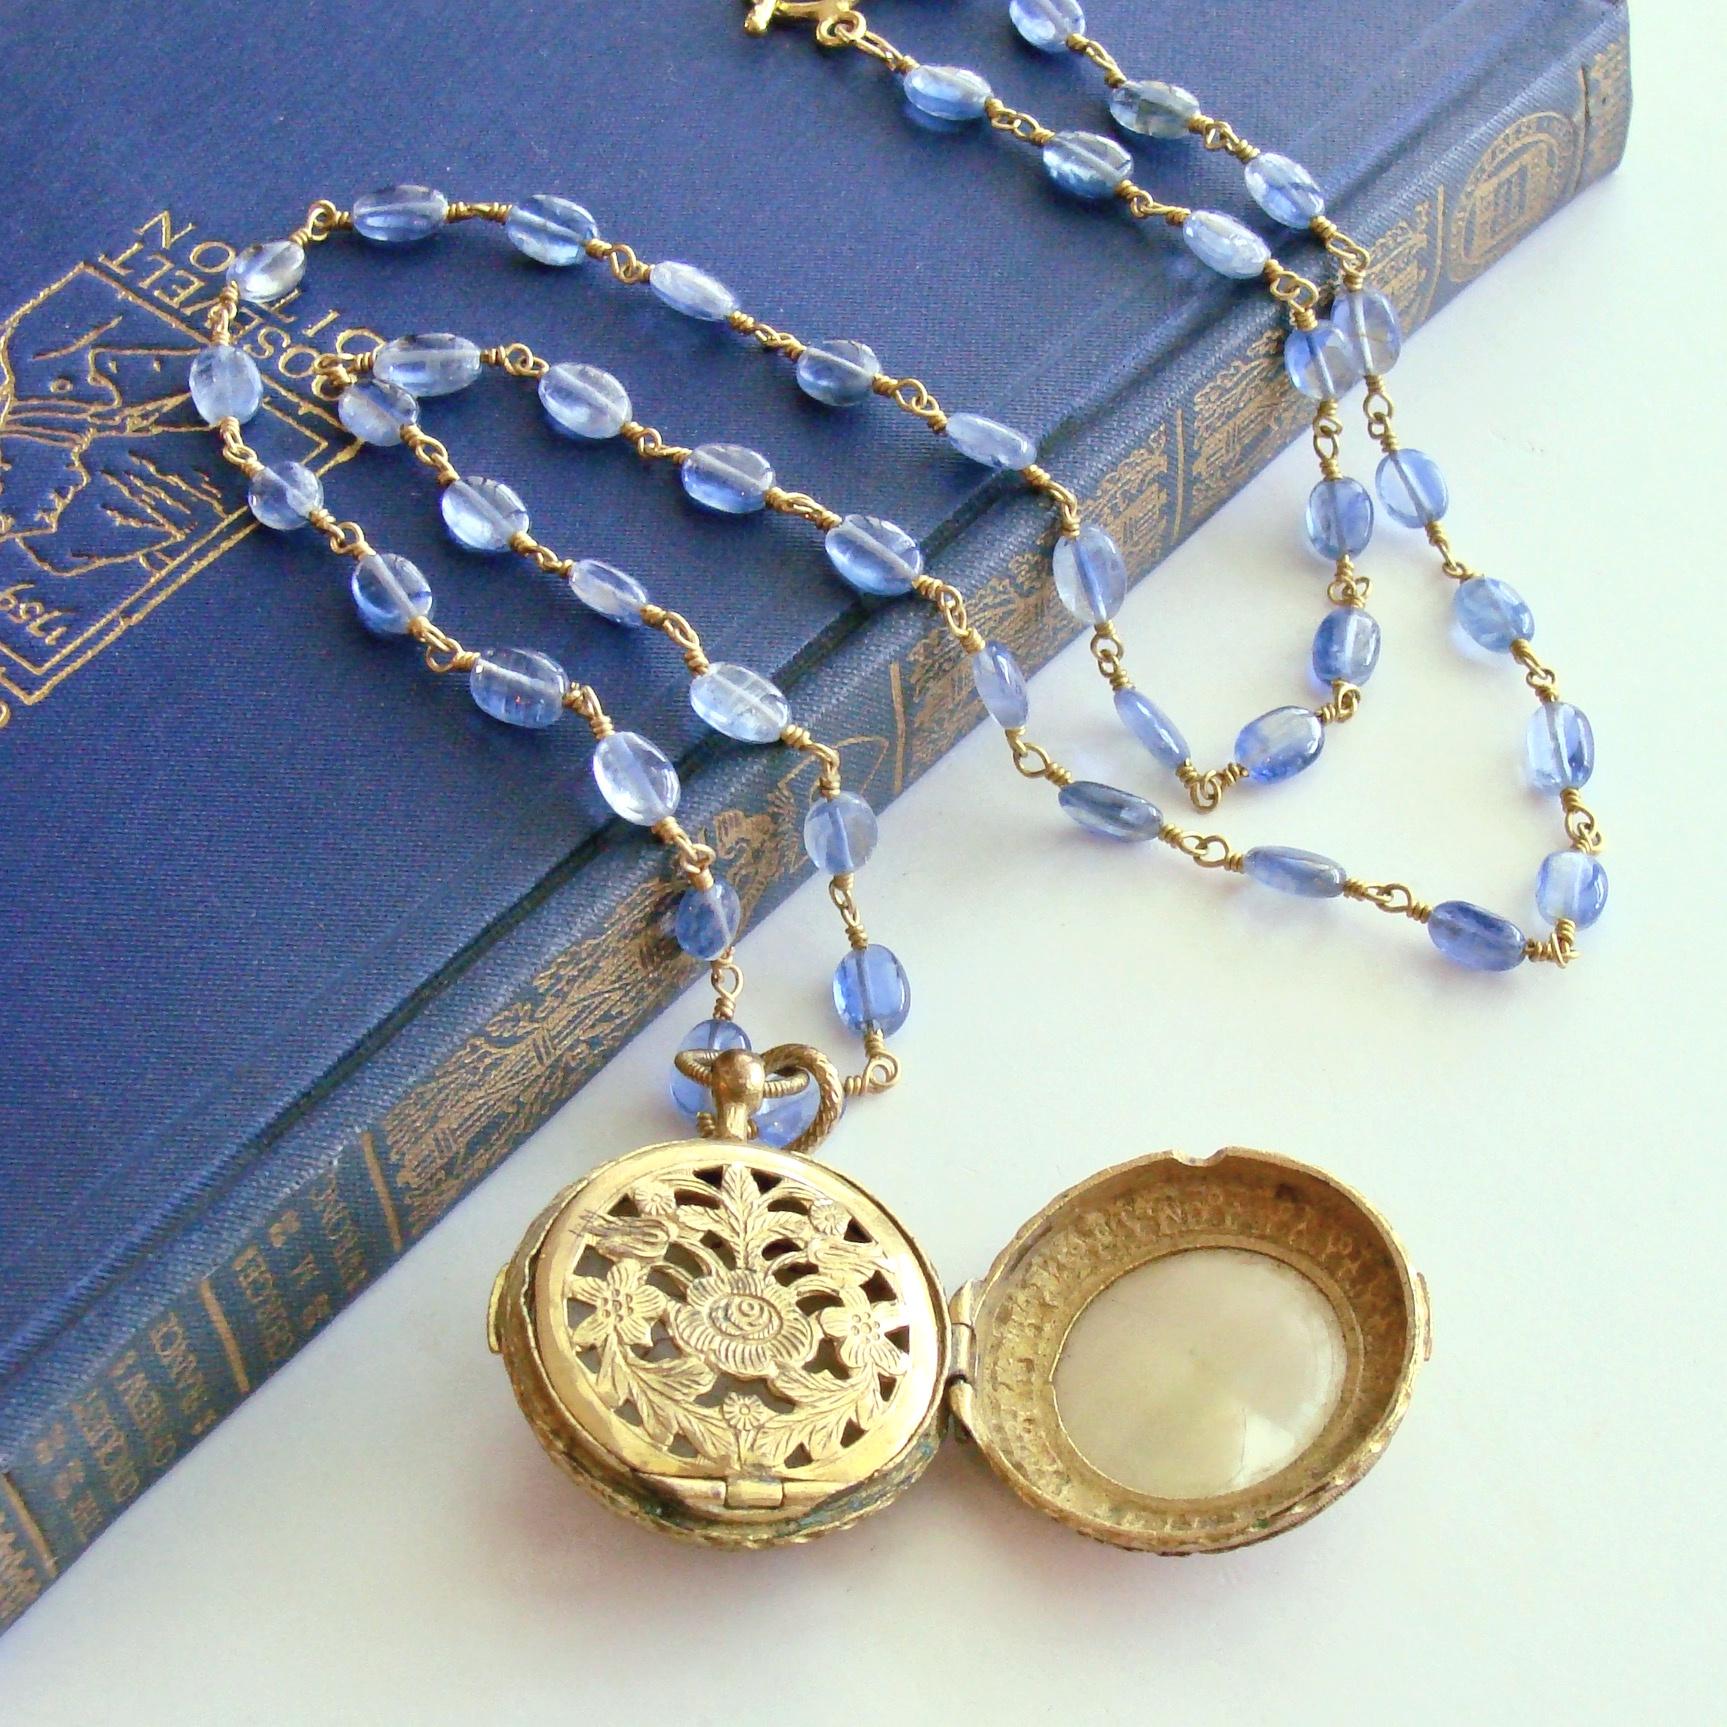 Oval Cut Kyanite with Georgian Crown & Mother of Pearl Vinaigrette Locket, Azora Necklace